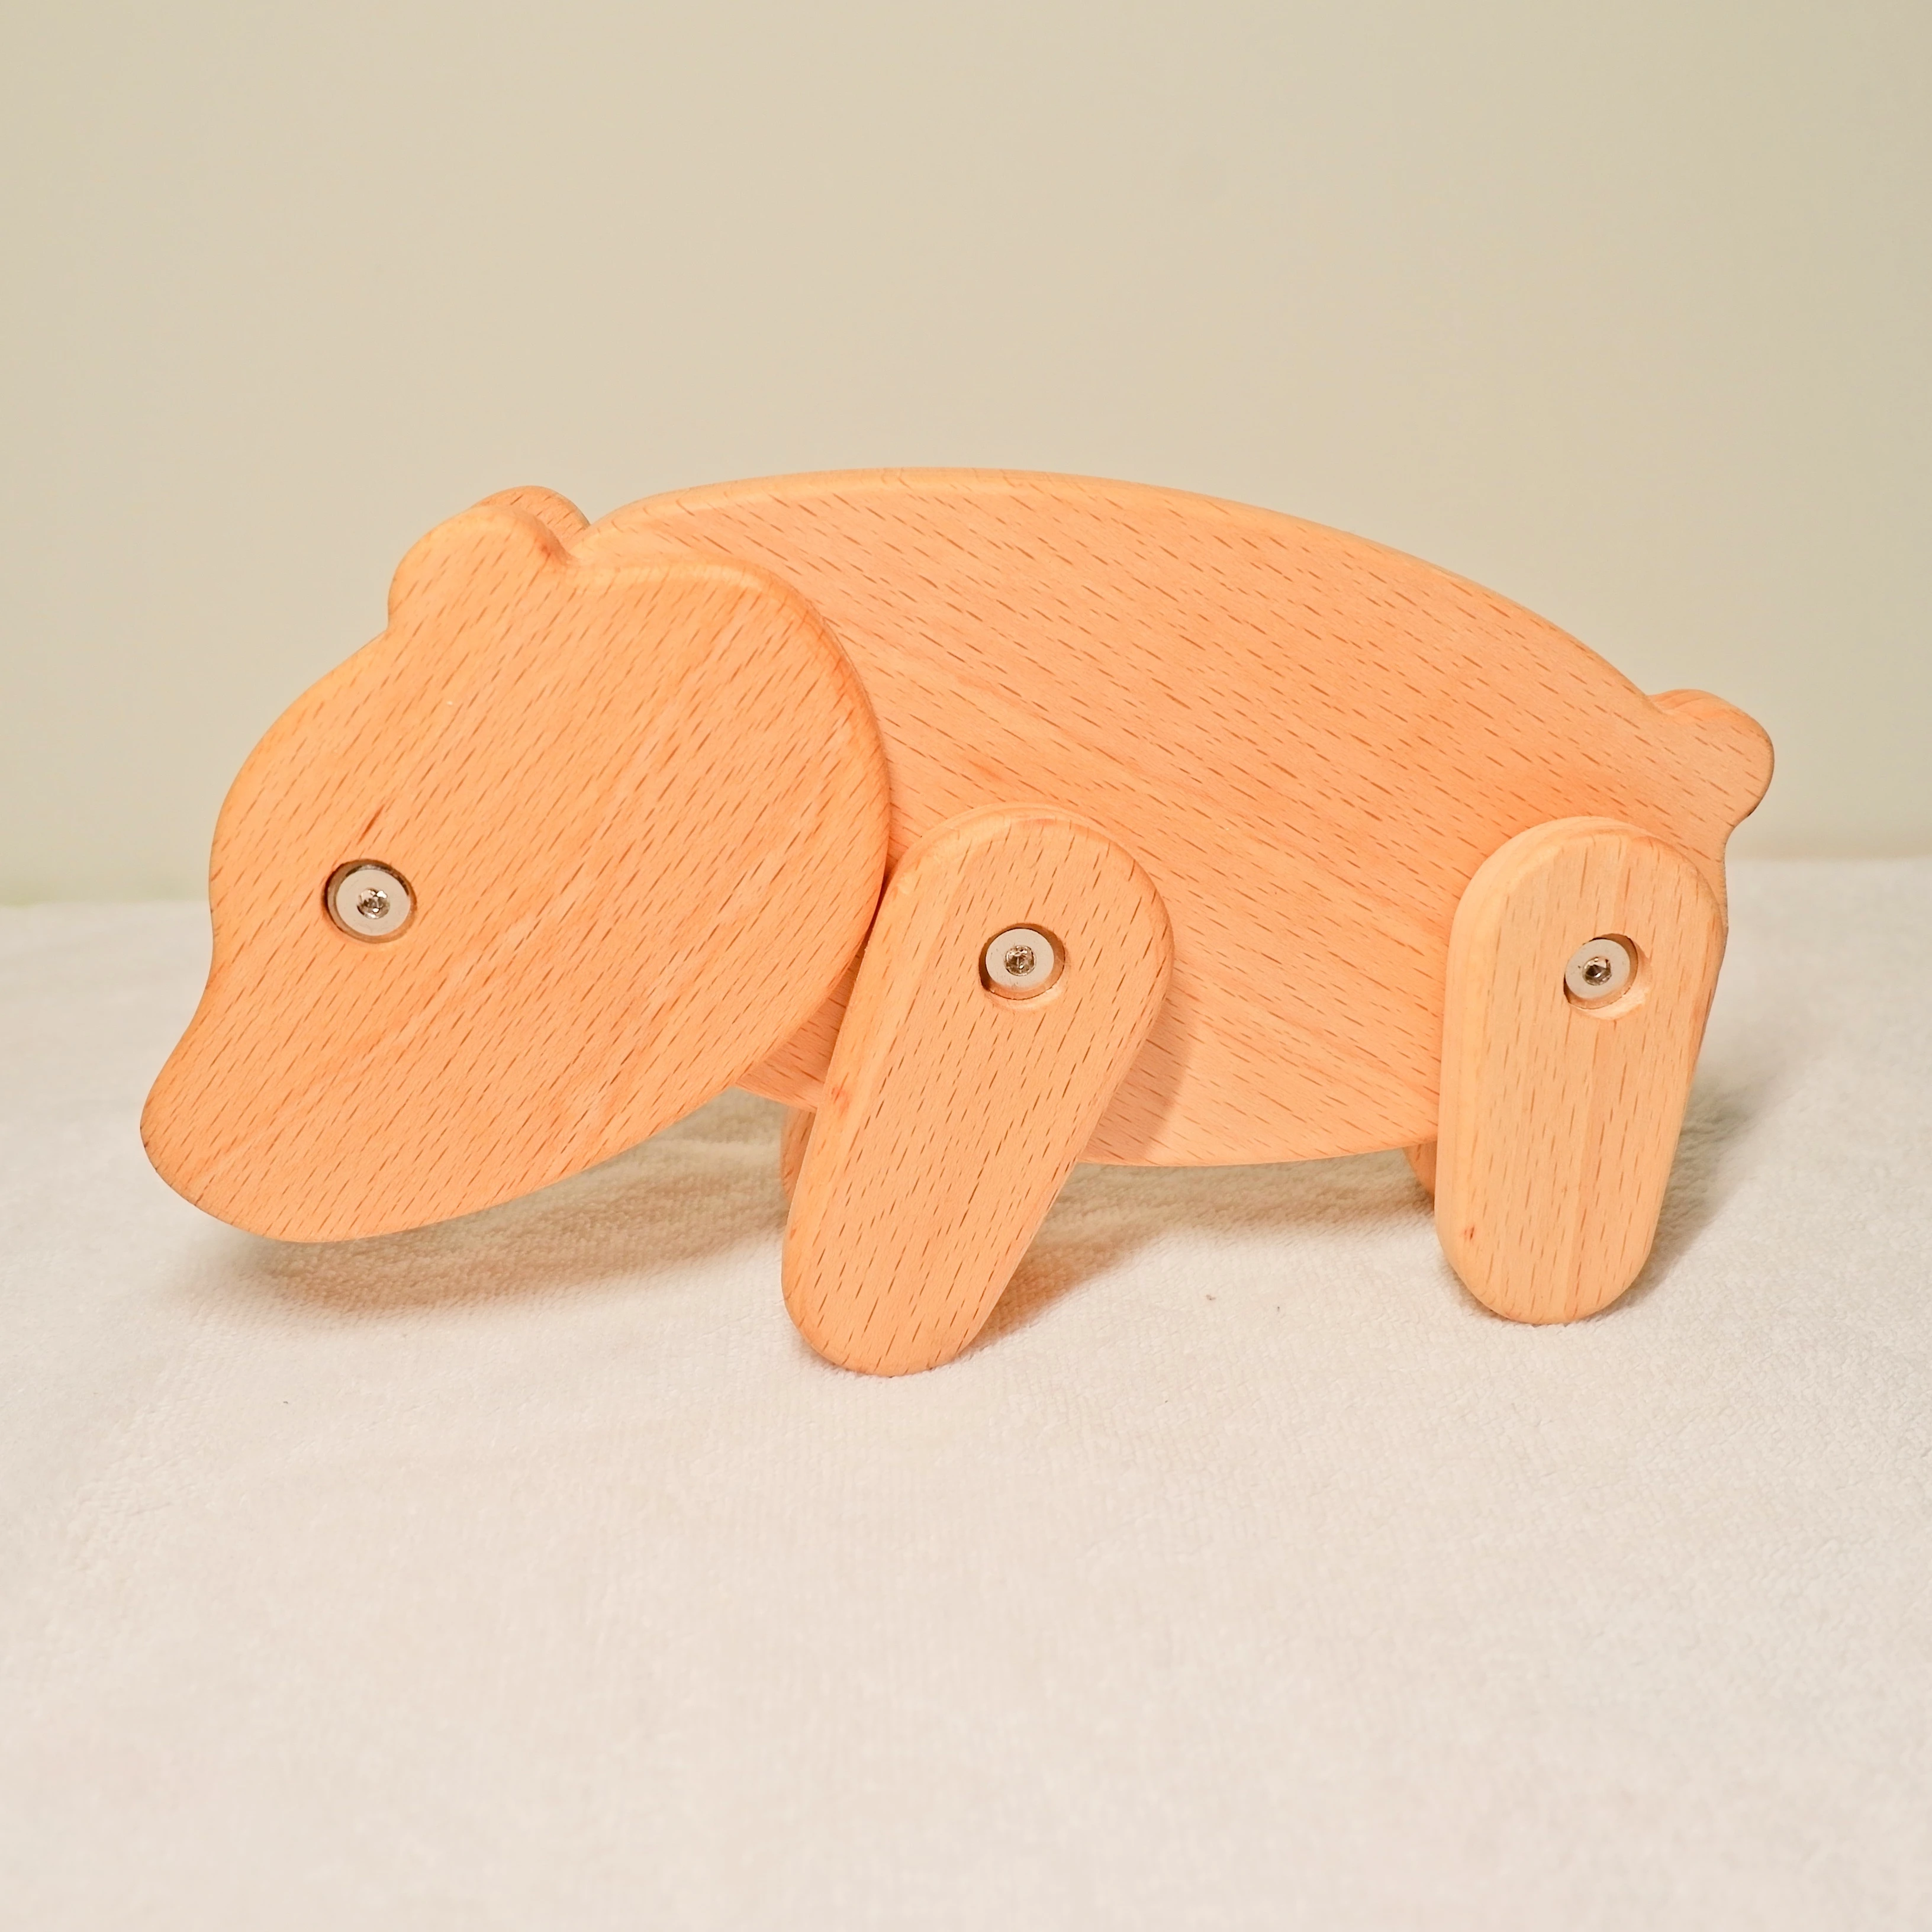 Bear Wooden Decoration New Design Animal Wood Crafts Creative Home Decor 2021 Novelty Wooden Toys